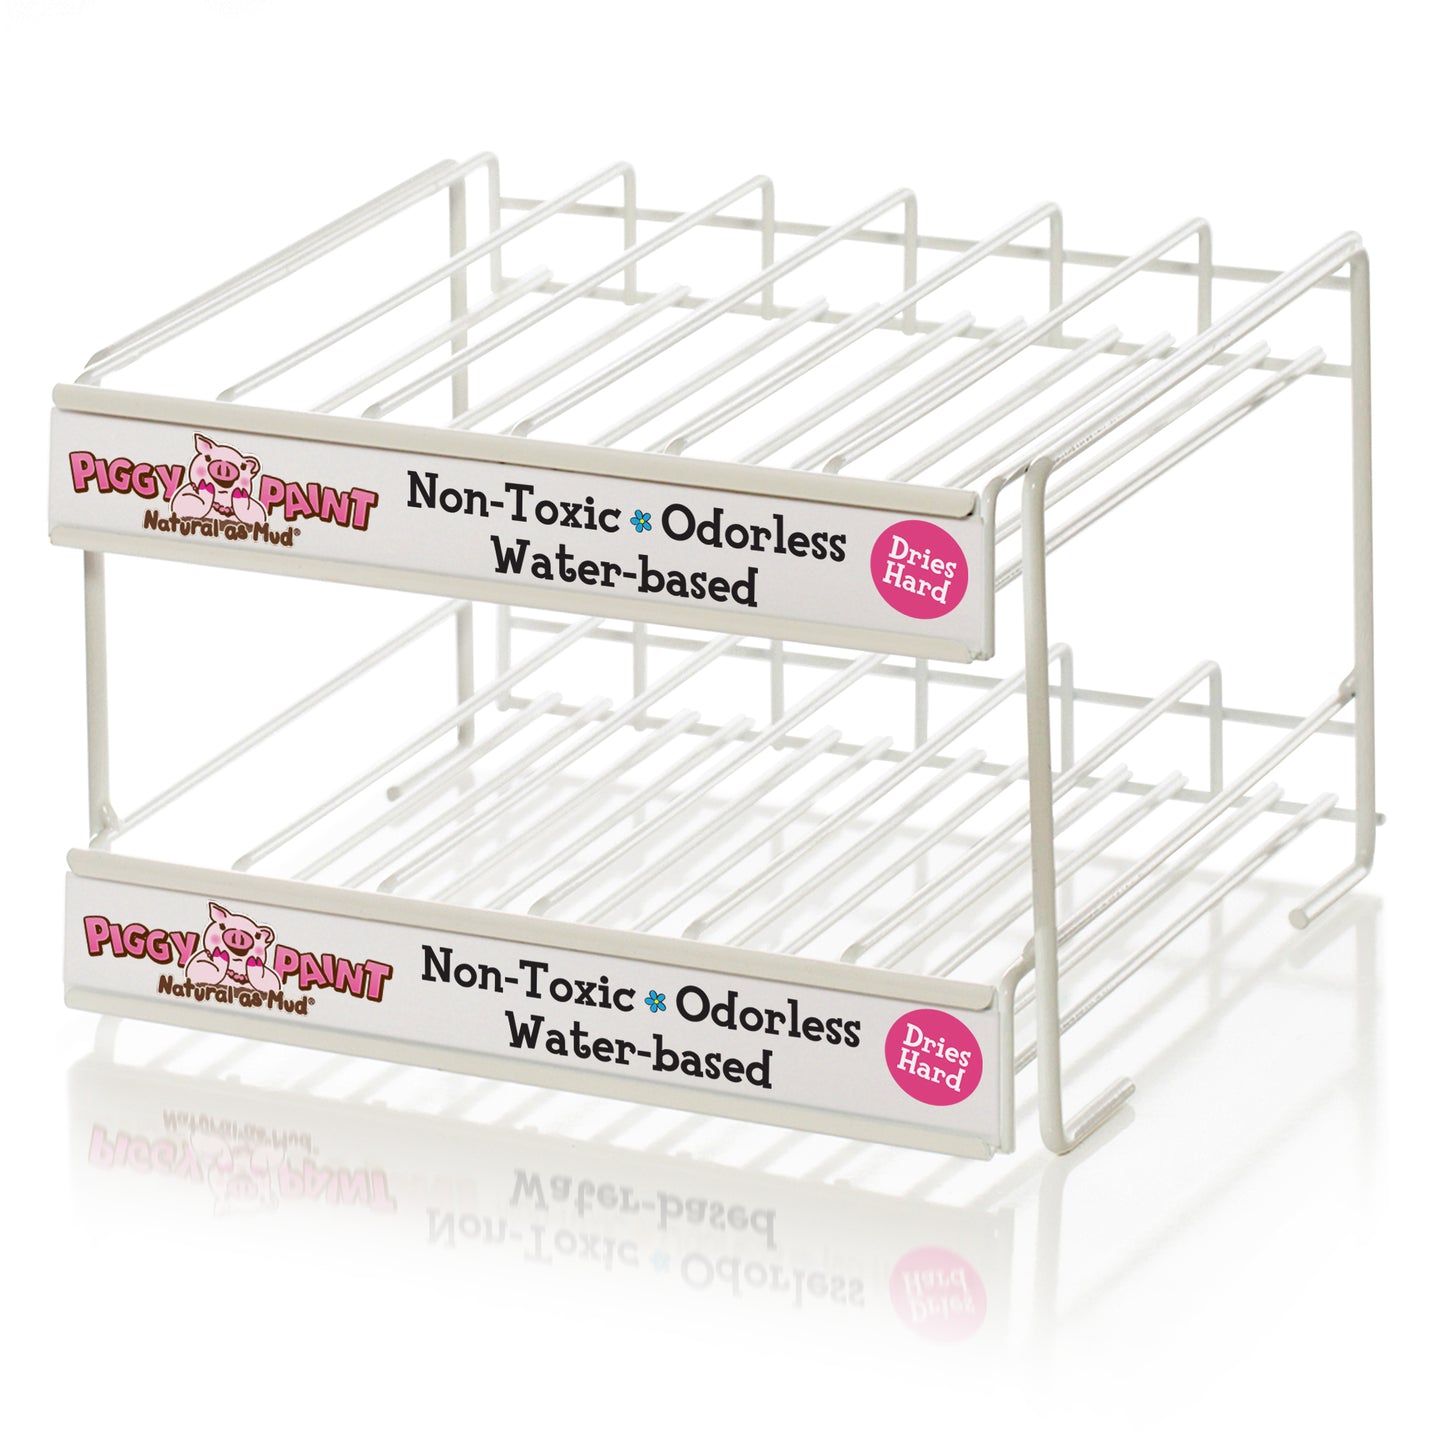 2 Tier Display – DISPLAY ONLY - Wholesale